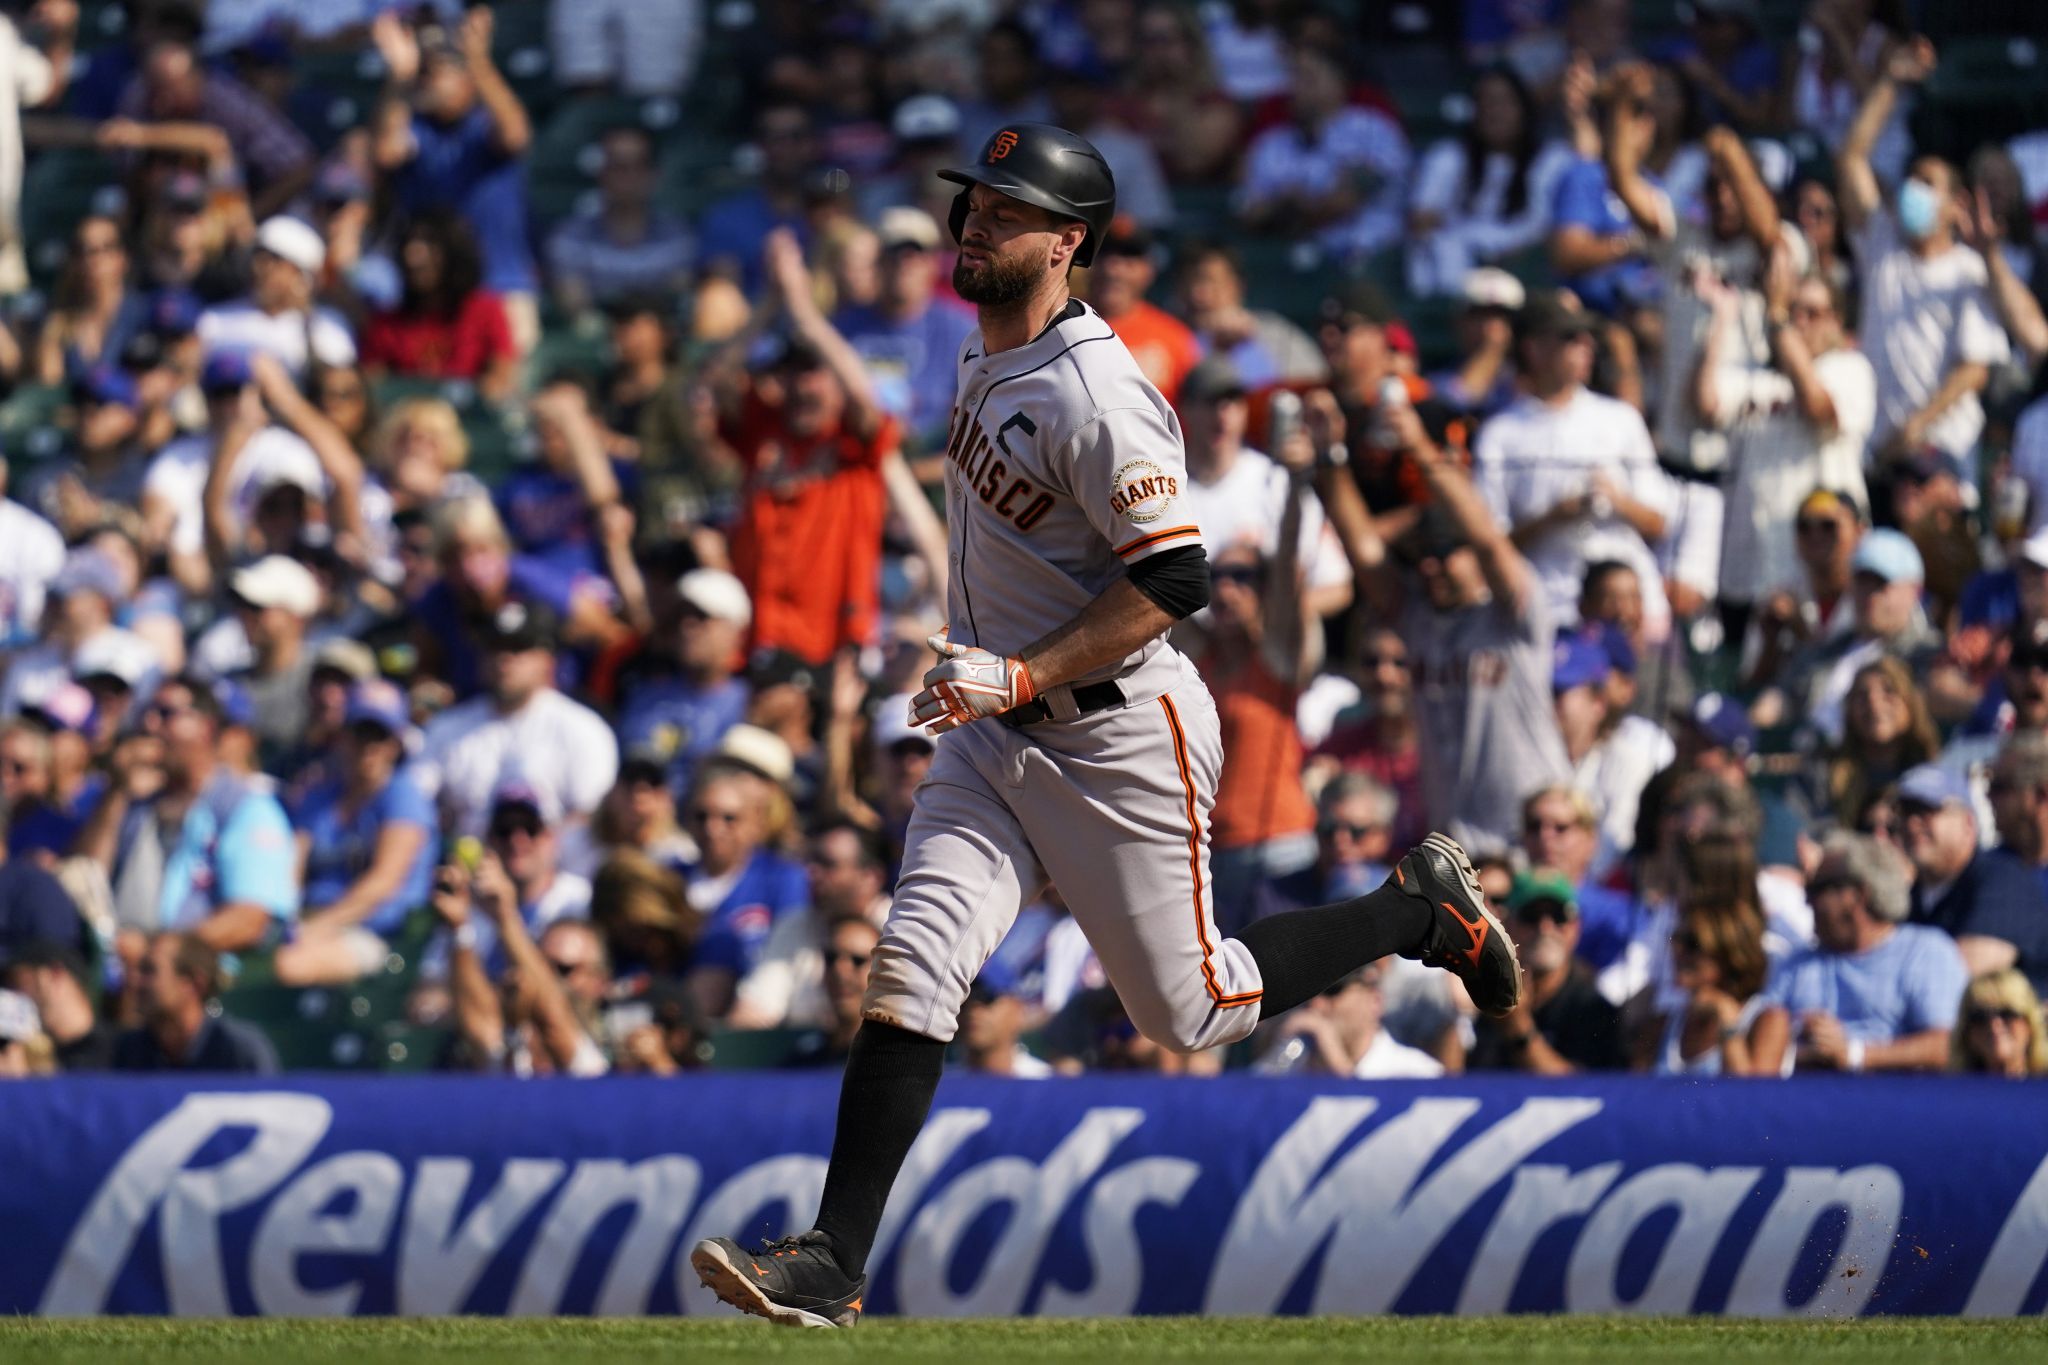 Why Giants' Brandon Belt anointed himself team captain with a taped-on 'C'  vs. Cubs